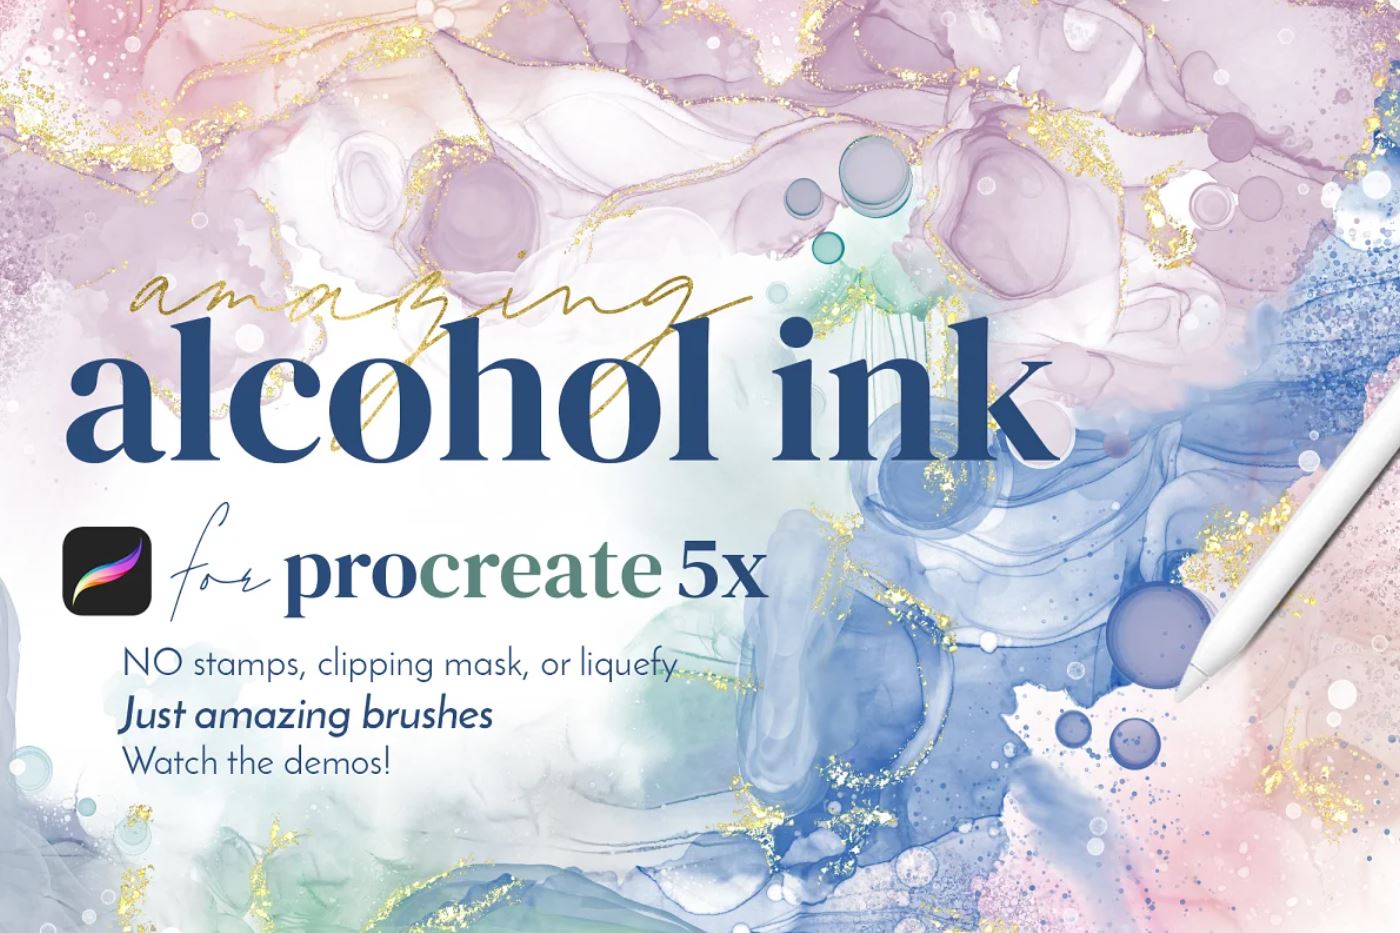 Alcohol ink painting procreate brushes to design digital paintings